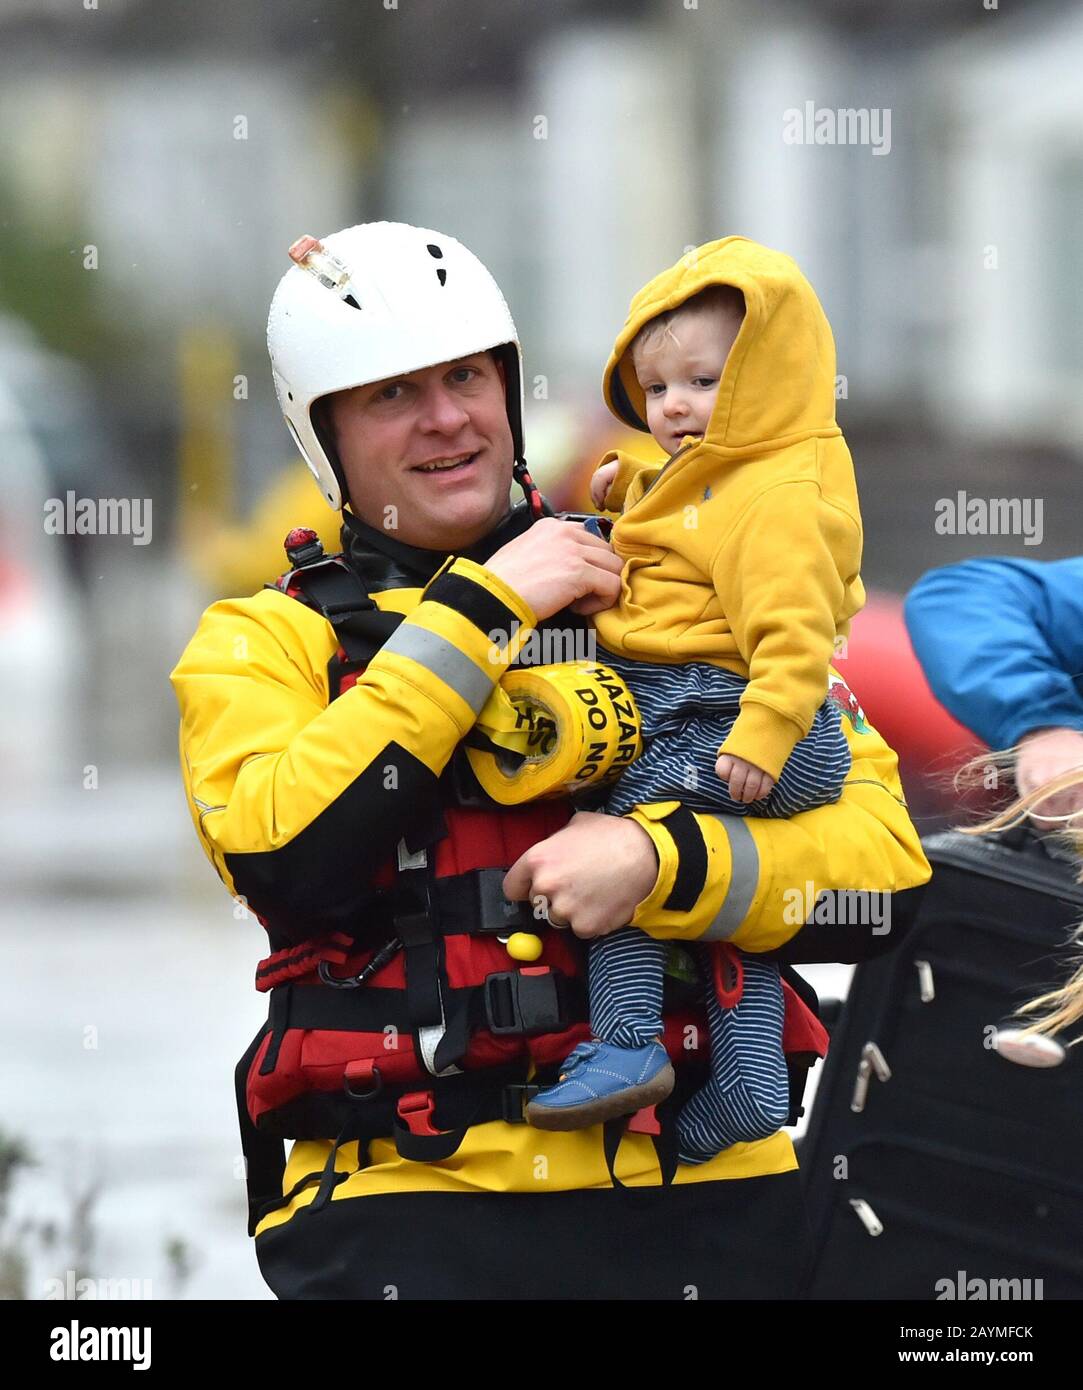 One-year-old Blake is carried by a rescue worker as emergency services continue to take families to safety, after flooding in Nantgarw, Wales, as Storm Dennis hit the UK. Stock Photo